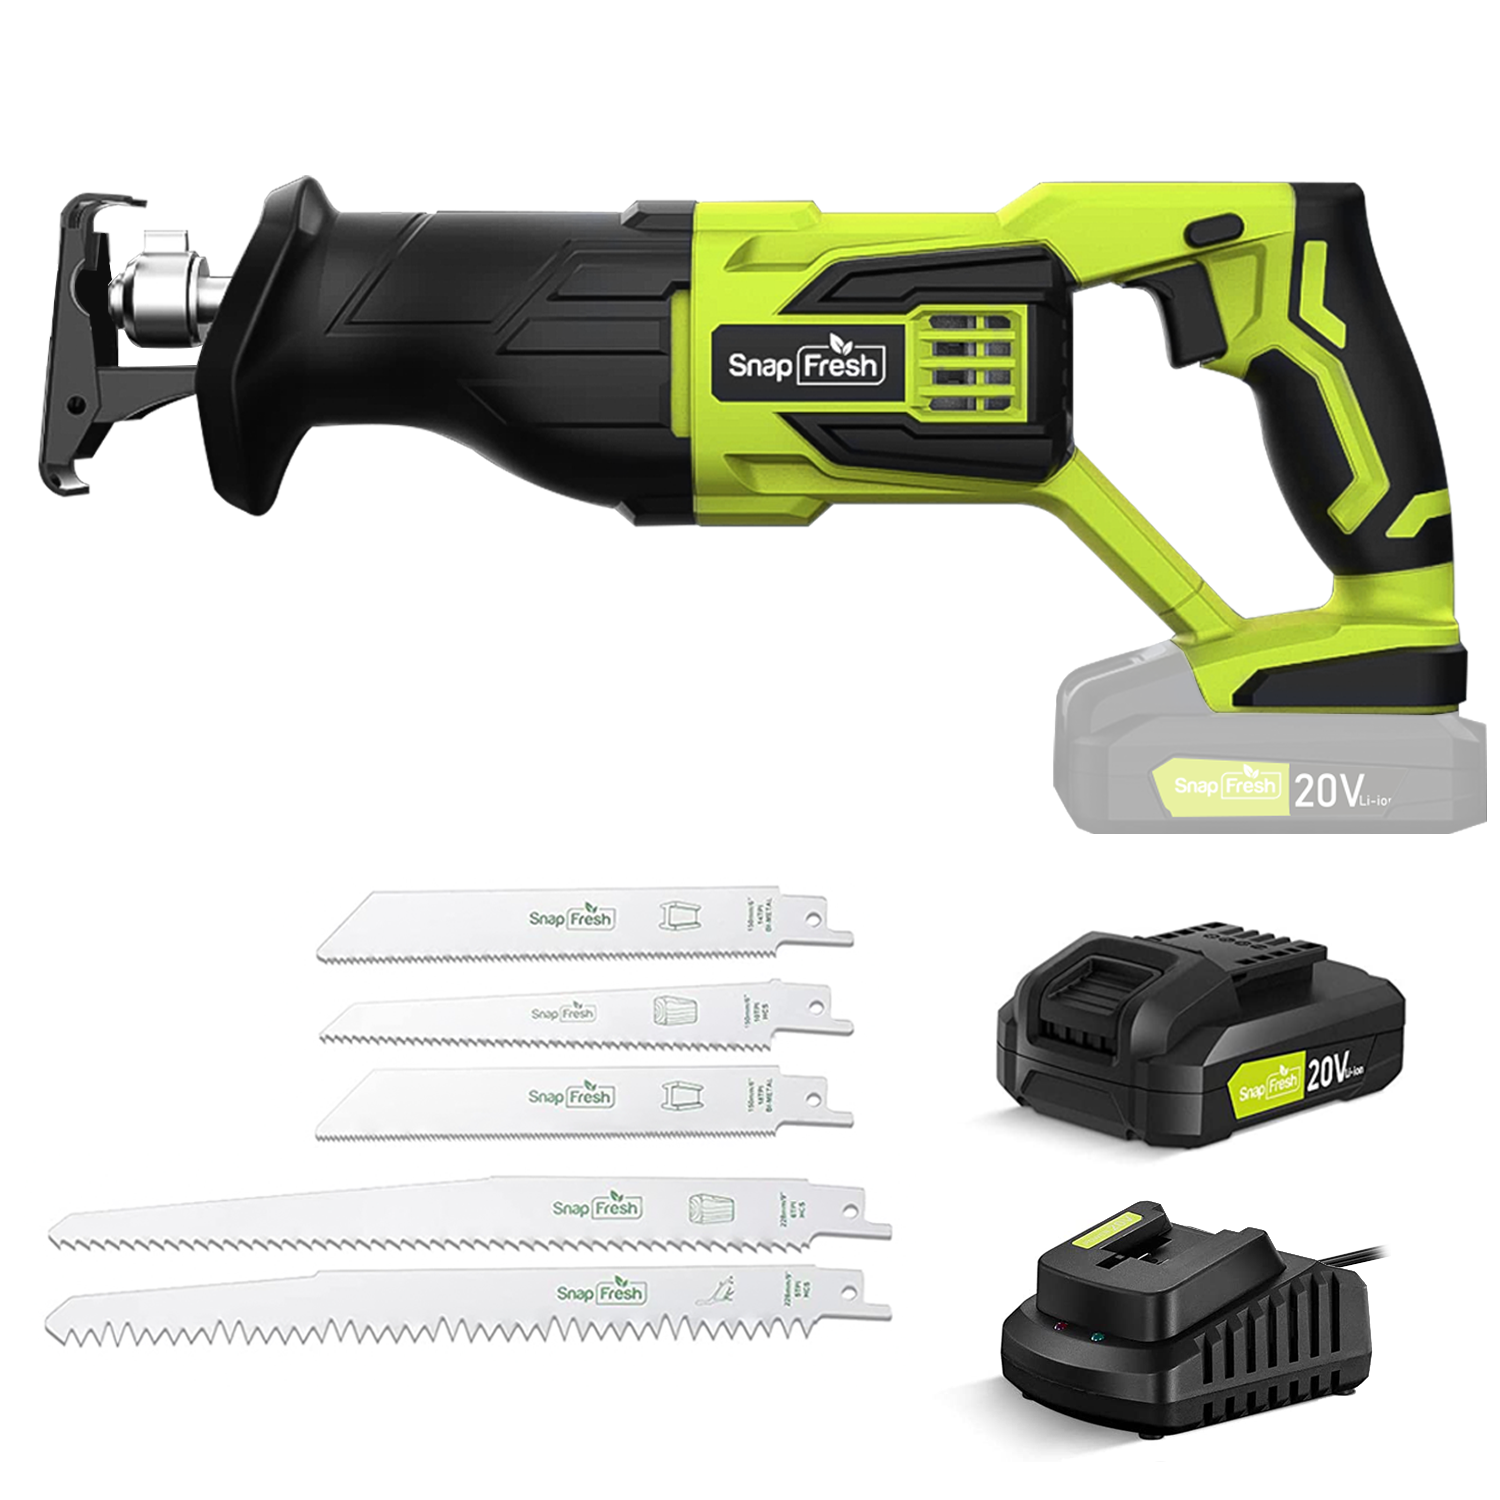 20V Reciprocating Saw with 2.0 Li-ion Battery and Charger (BBT-JOL01)